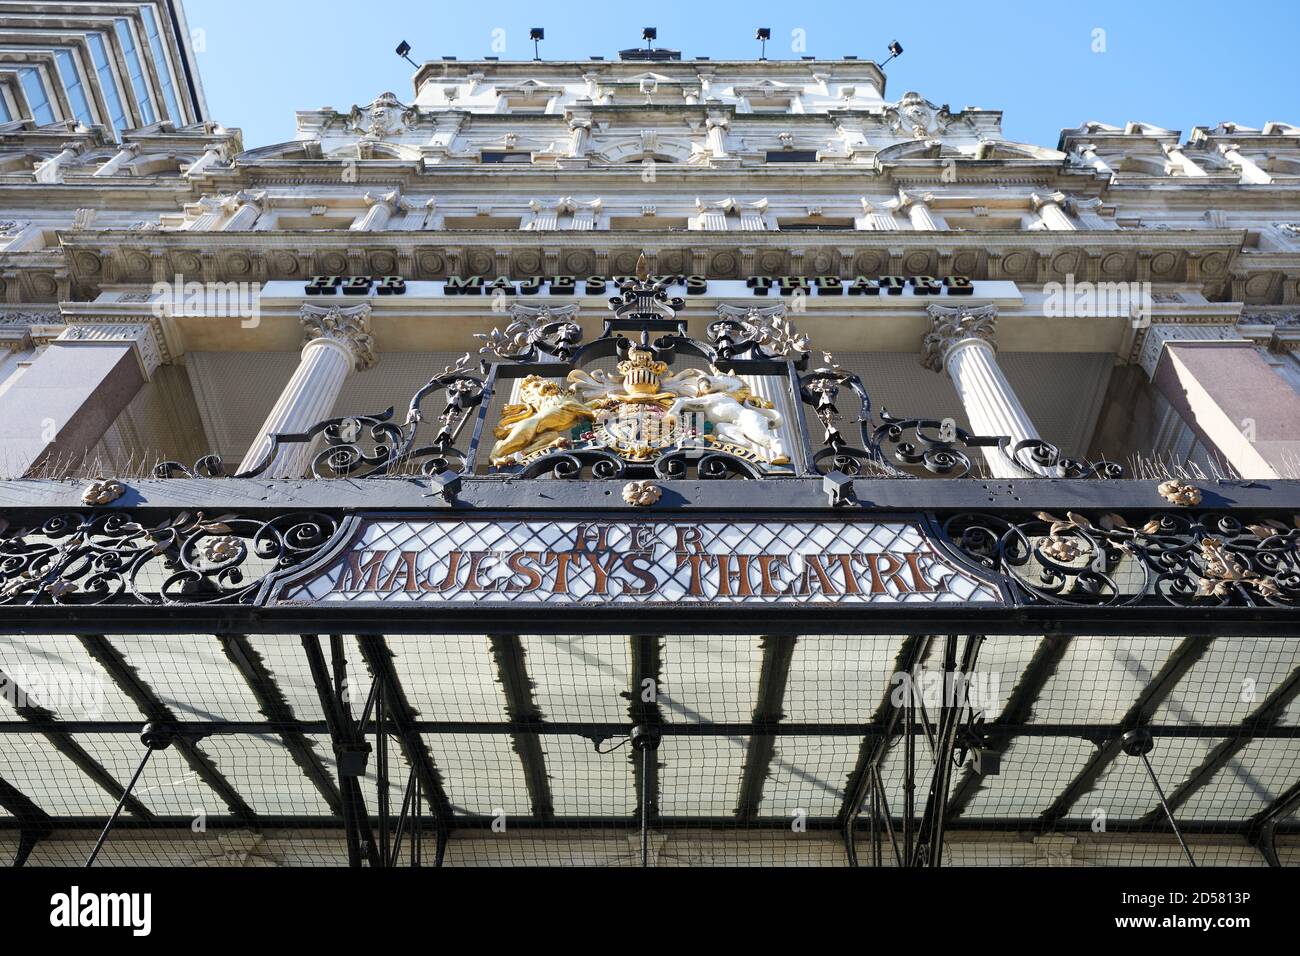 London, UK. - 11 Oct 2020: The canopy and royal coat of arms in front of Her Majestys Theatre in Haymarket. The The present building dates from 1897. Stock Photo